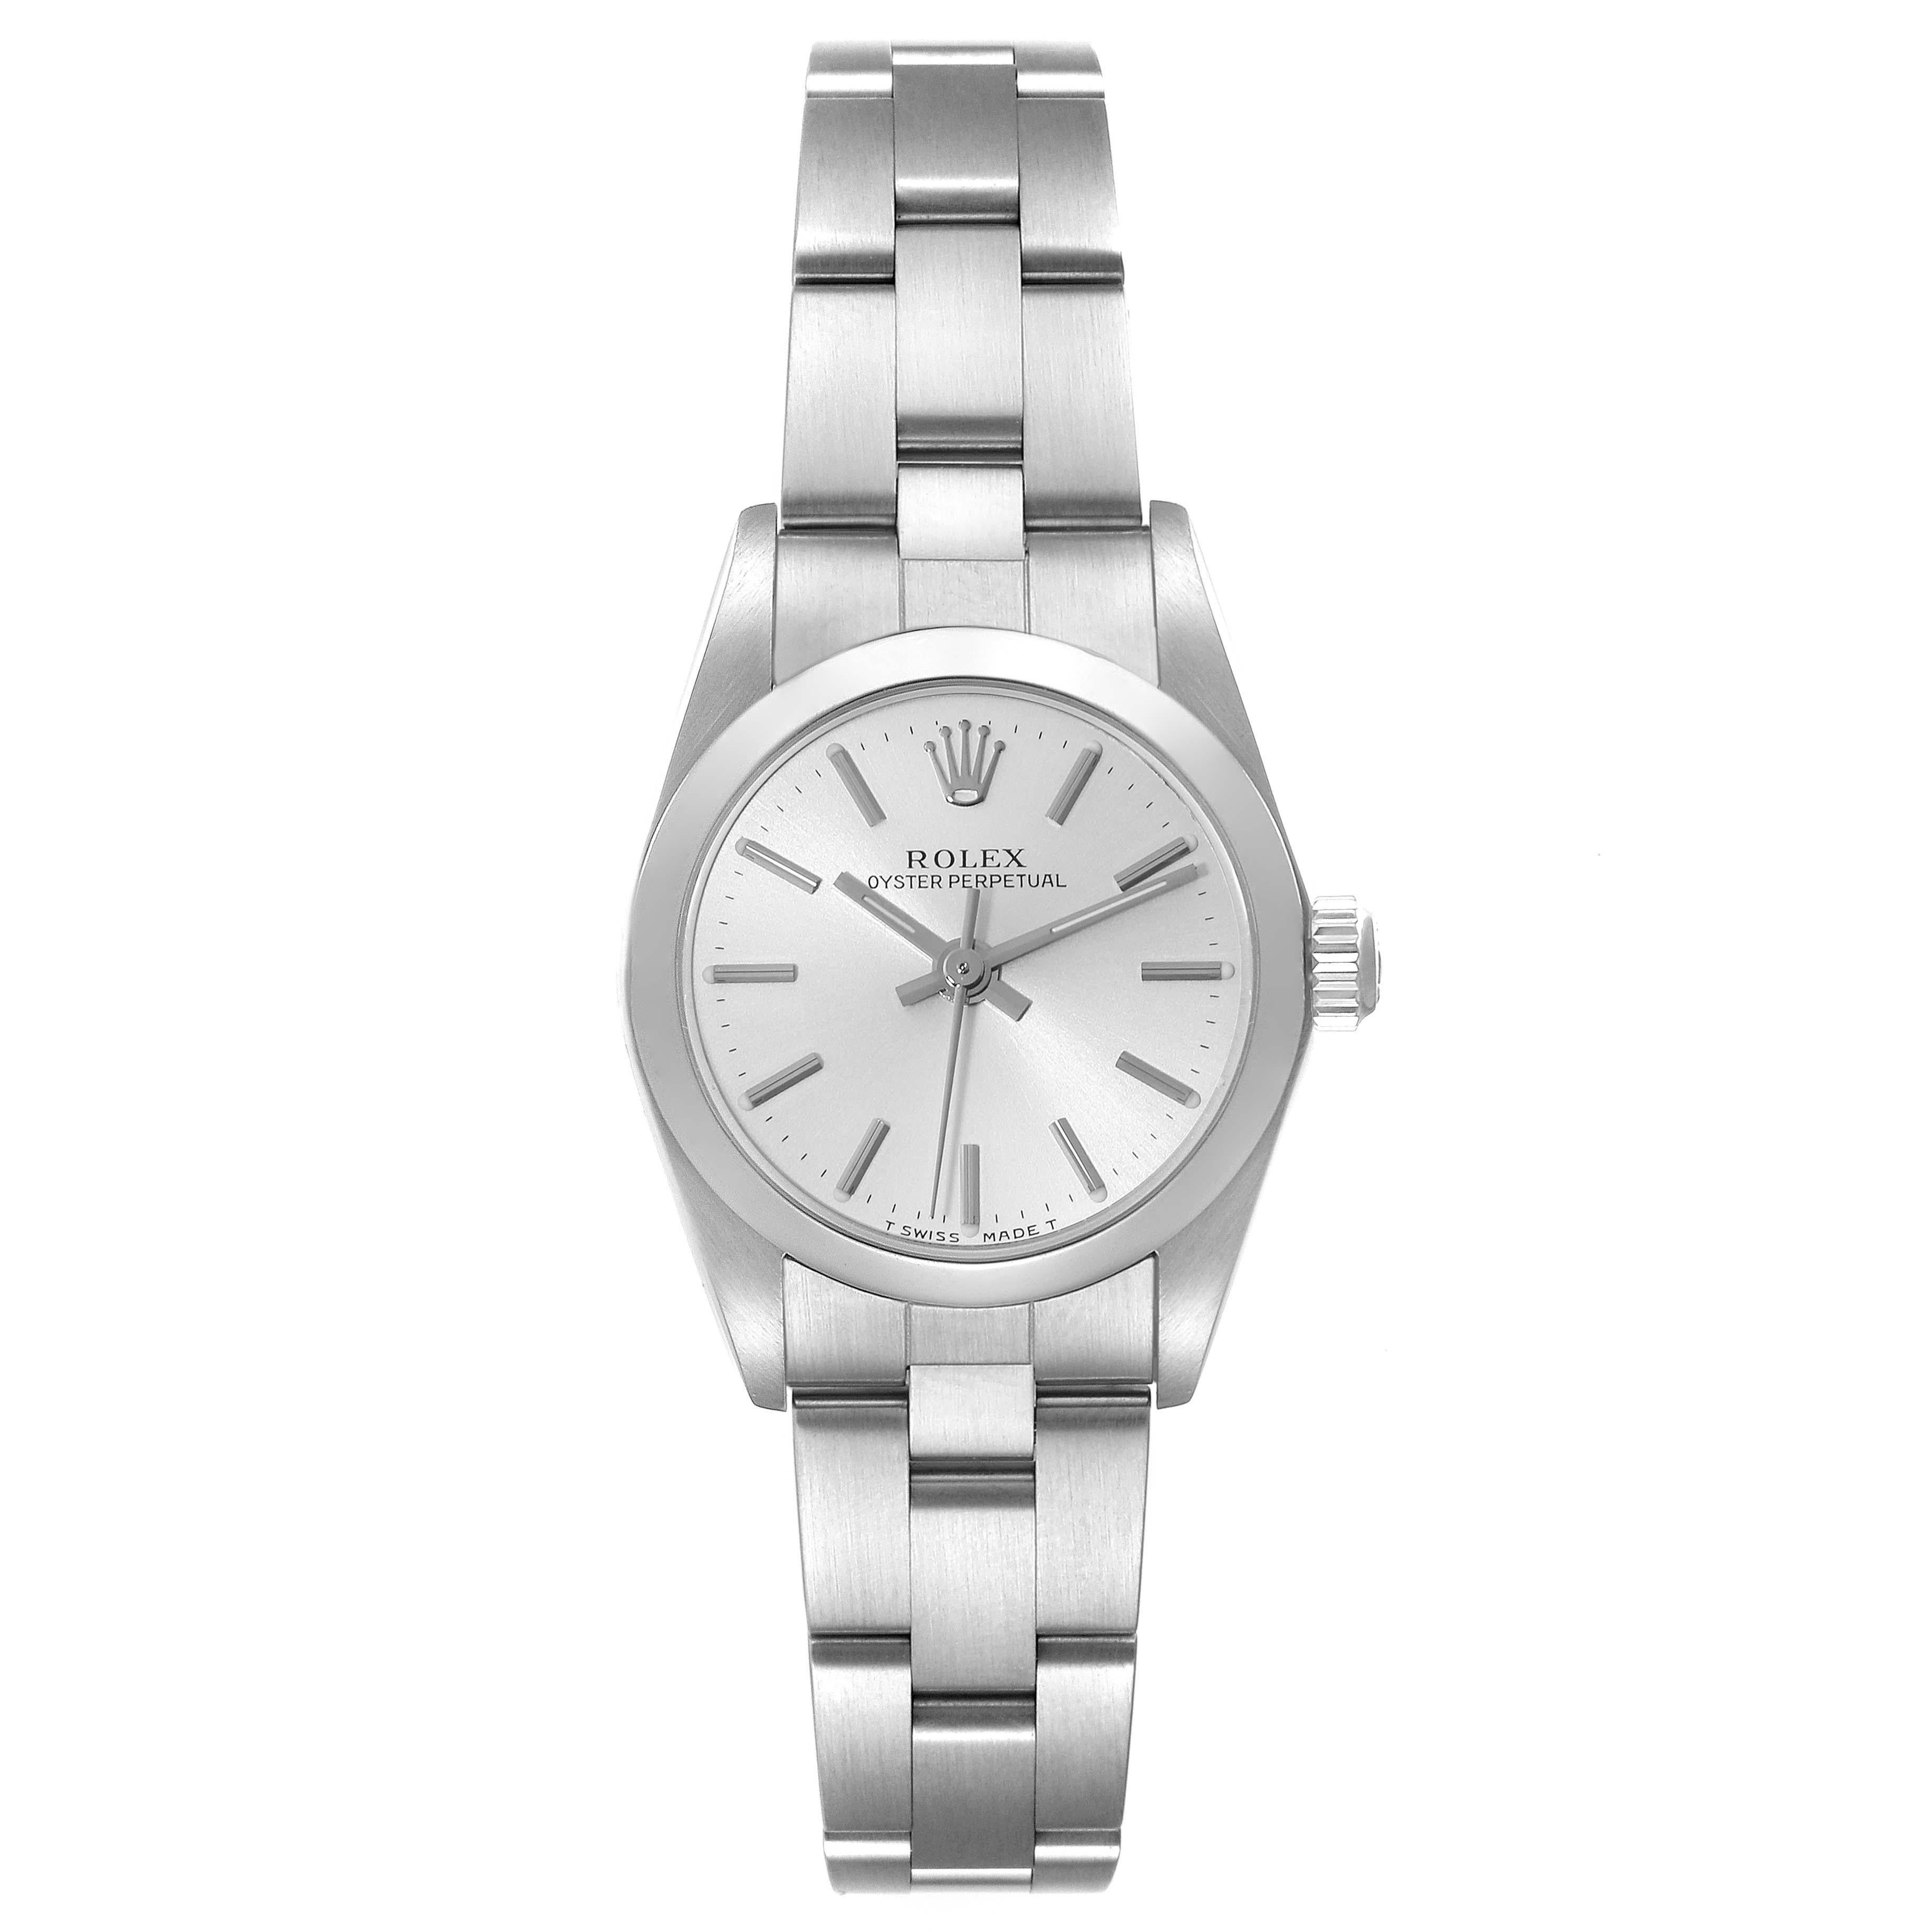 Rolex Oyster Perpetual Non-Date Steel Ladies Watch 76080 Box Papers. Officially certified chronometer automatic self-winding movement. Stainless steel oyster case 24 mm in diameter. Rolex logo on the crown. Stainless steel smooth bezel. Scratch